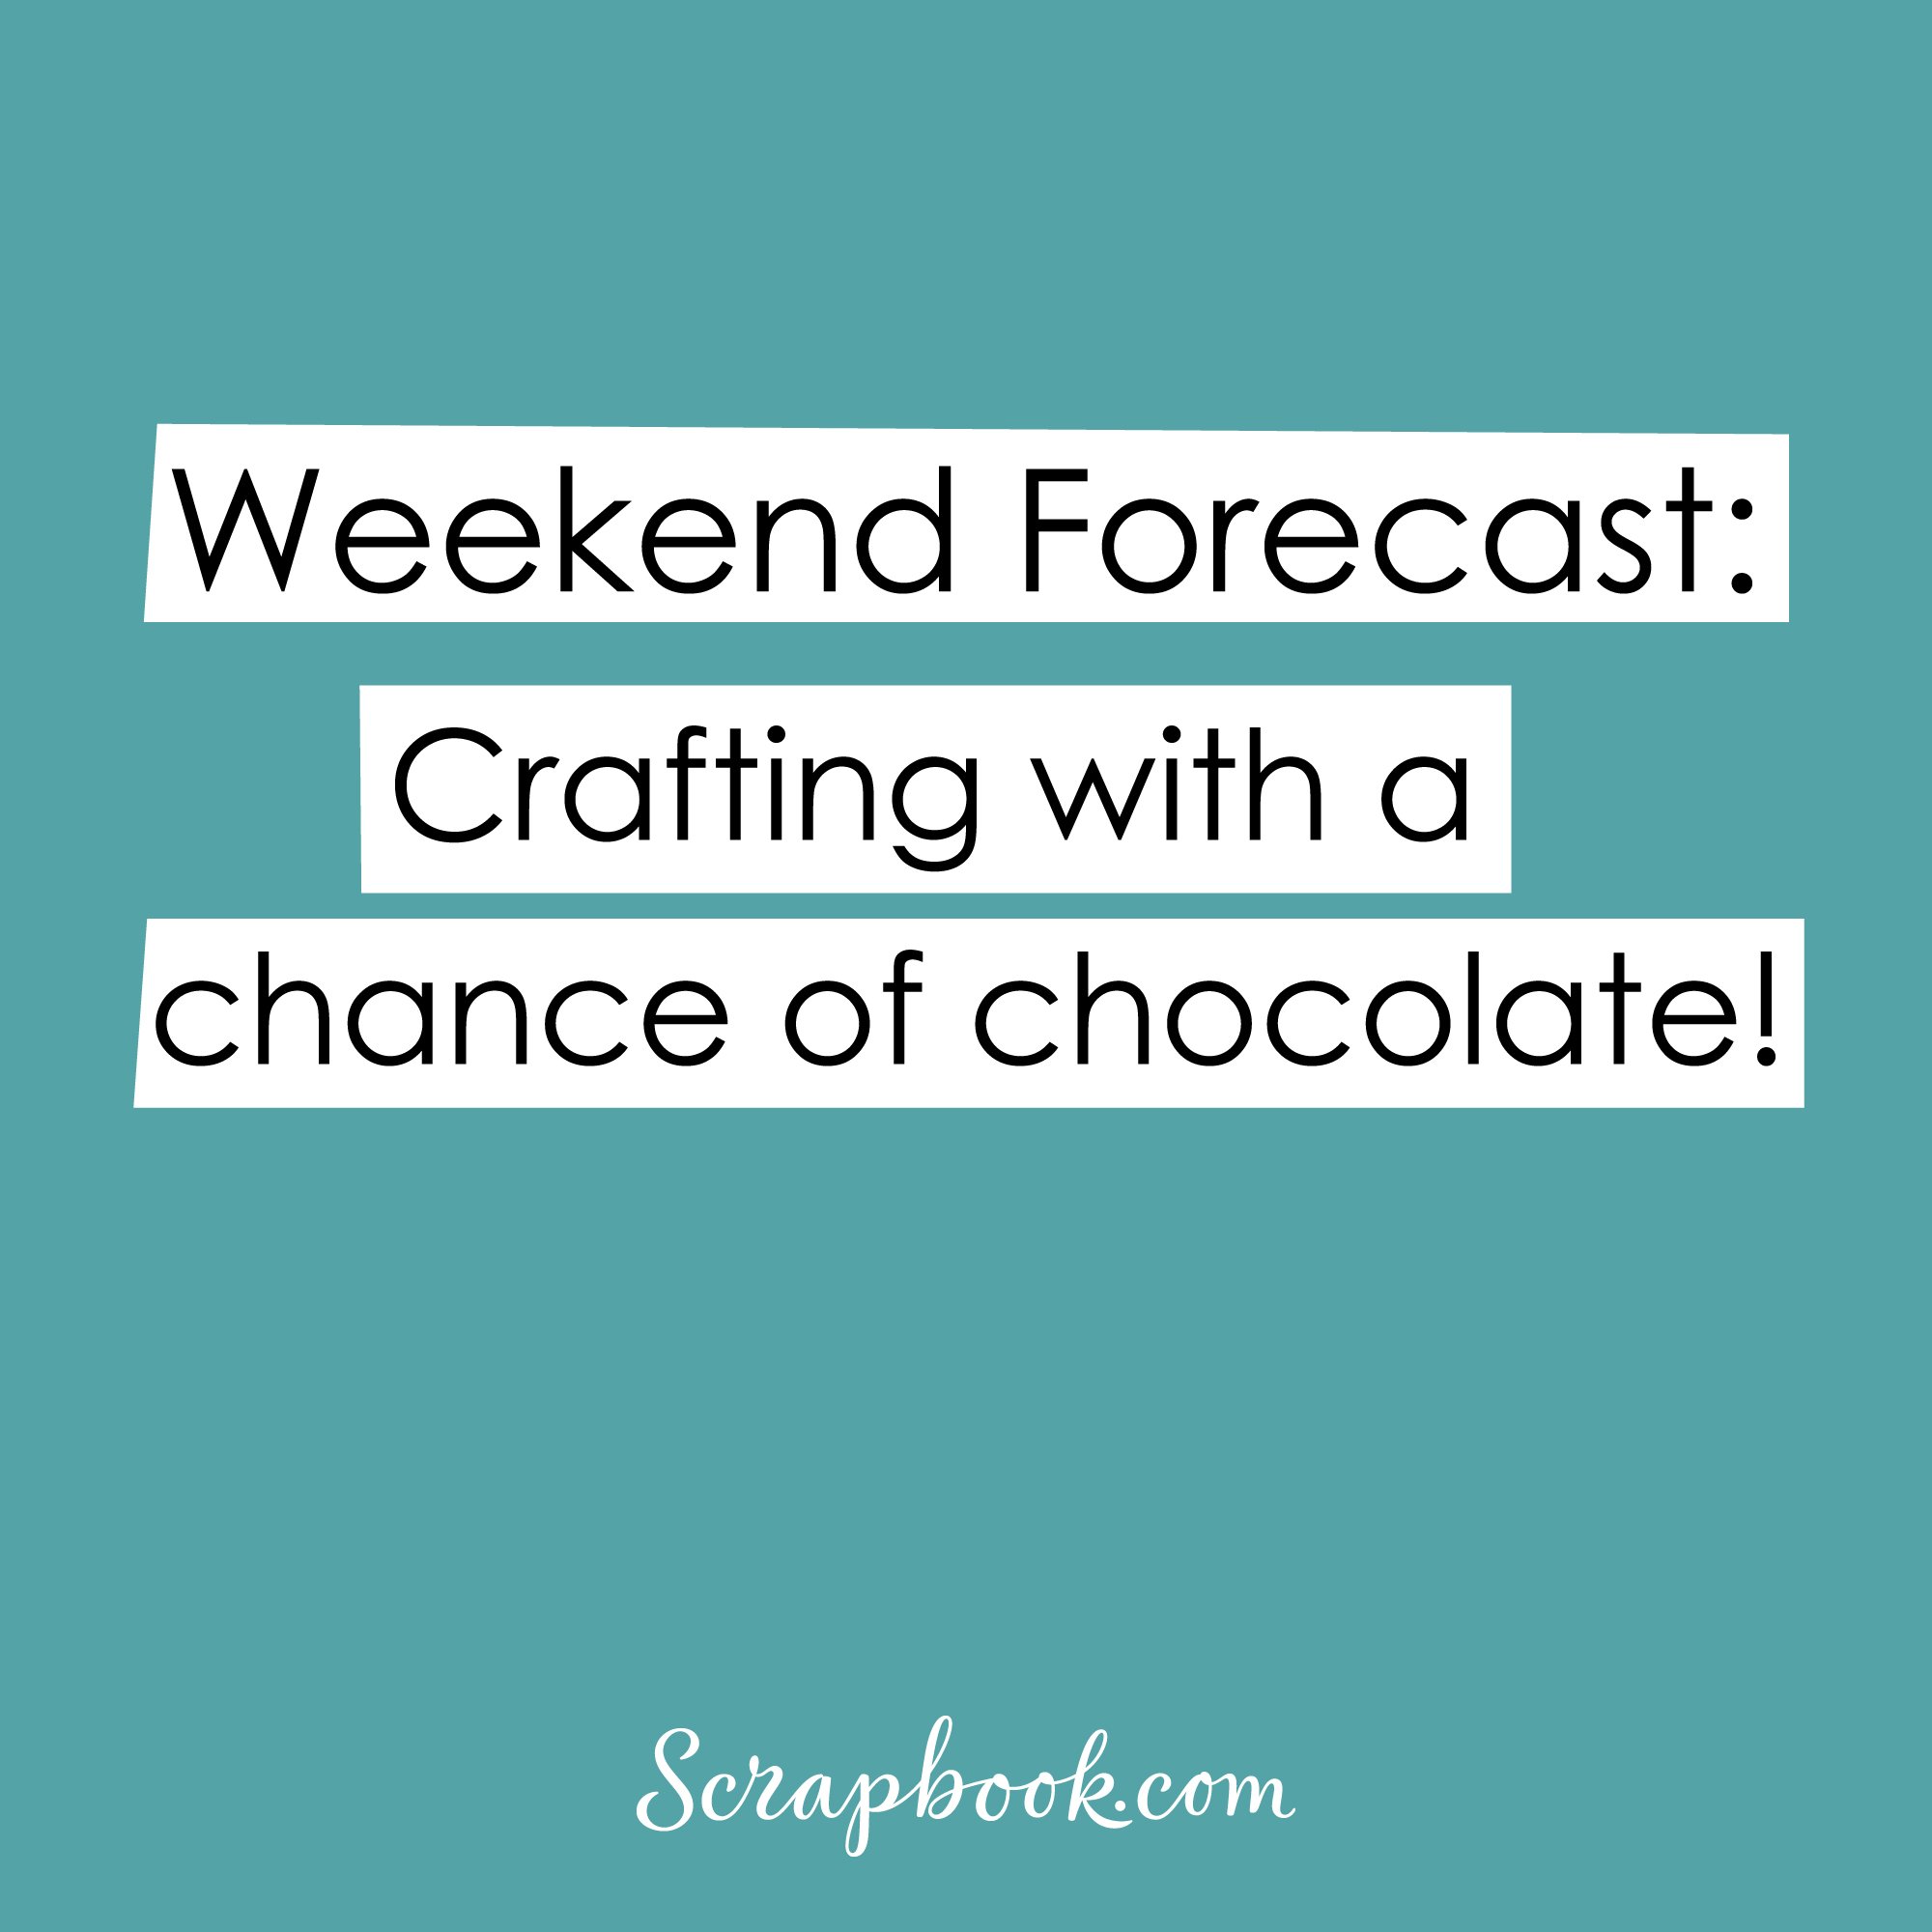 Weekend Forecast: Crafting with a chance of chocolate!